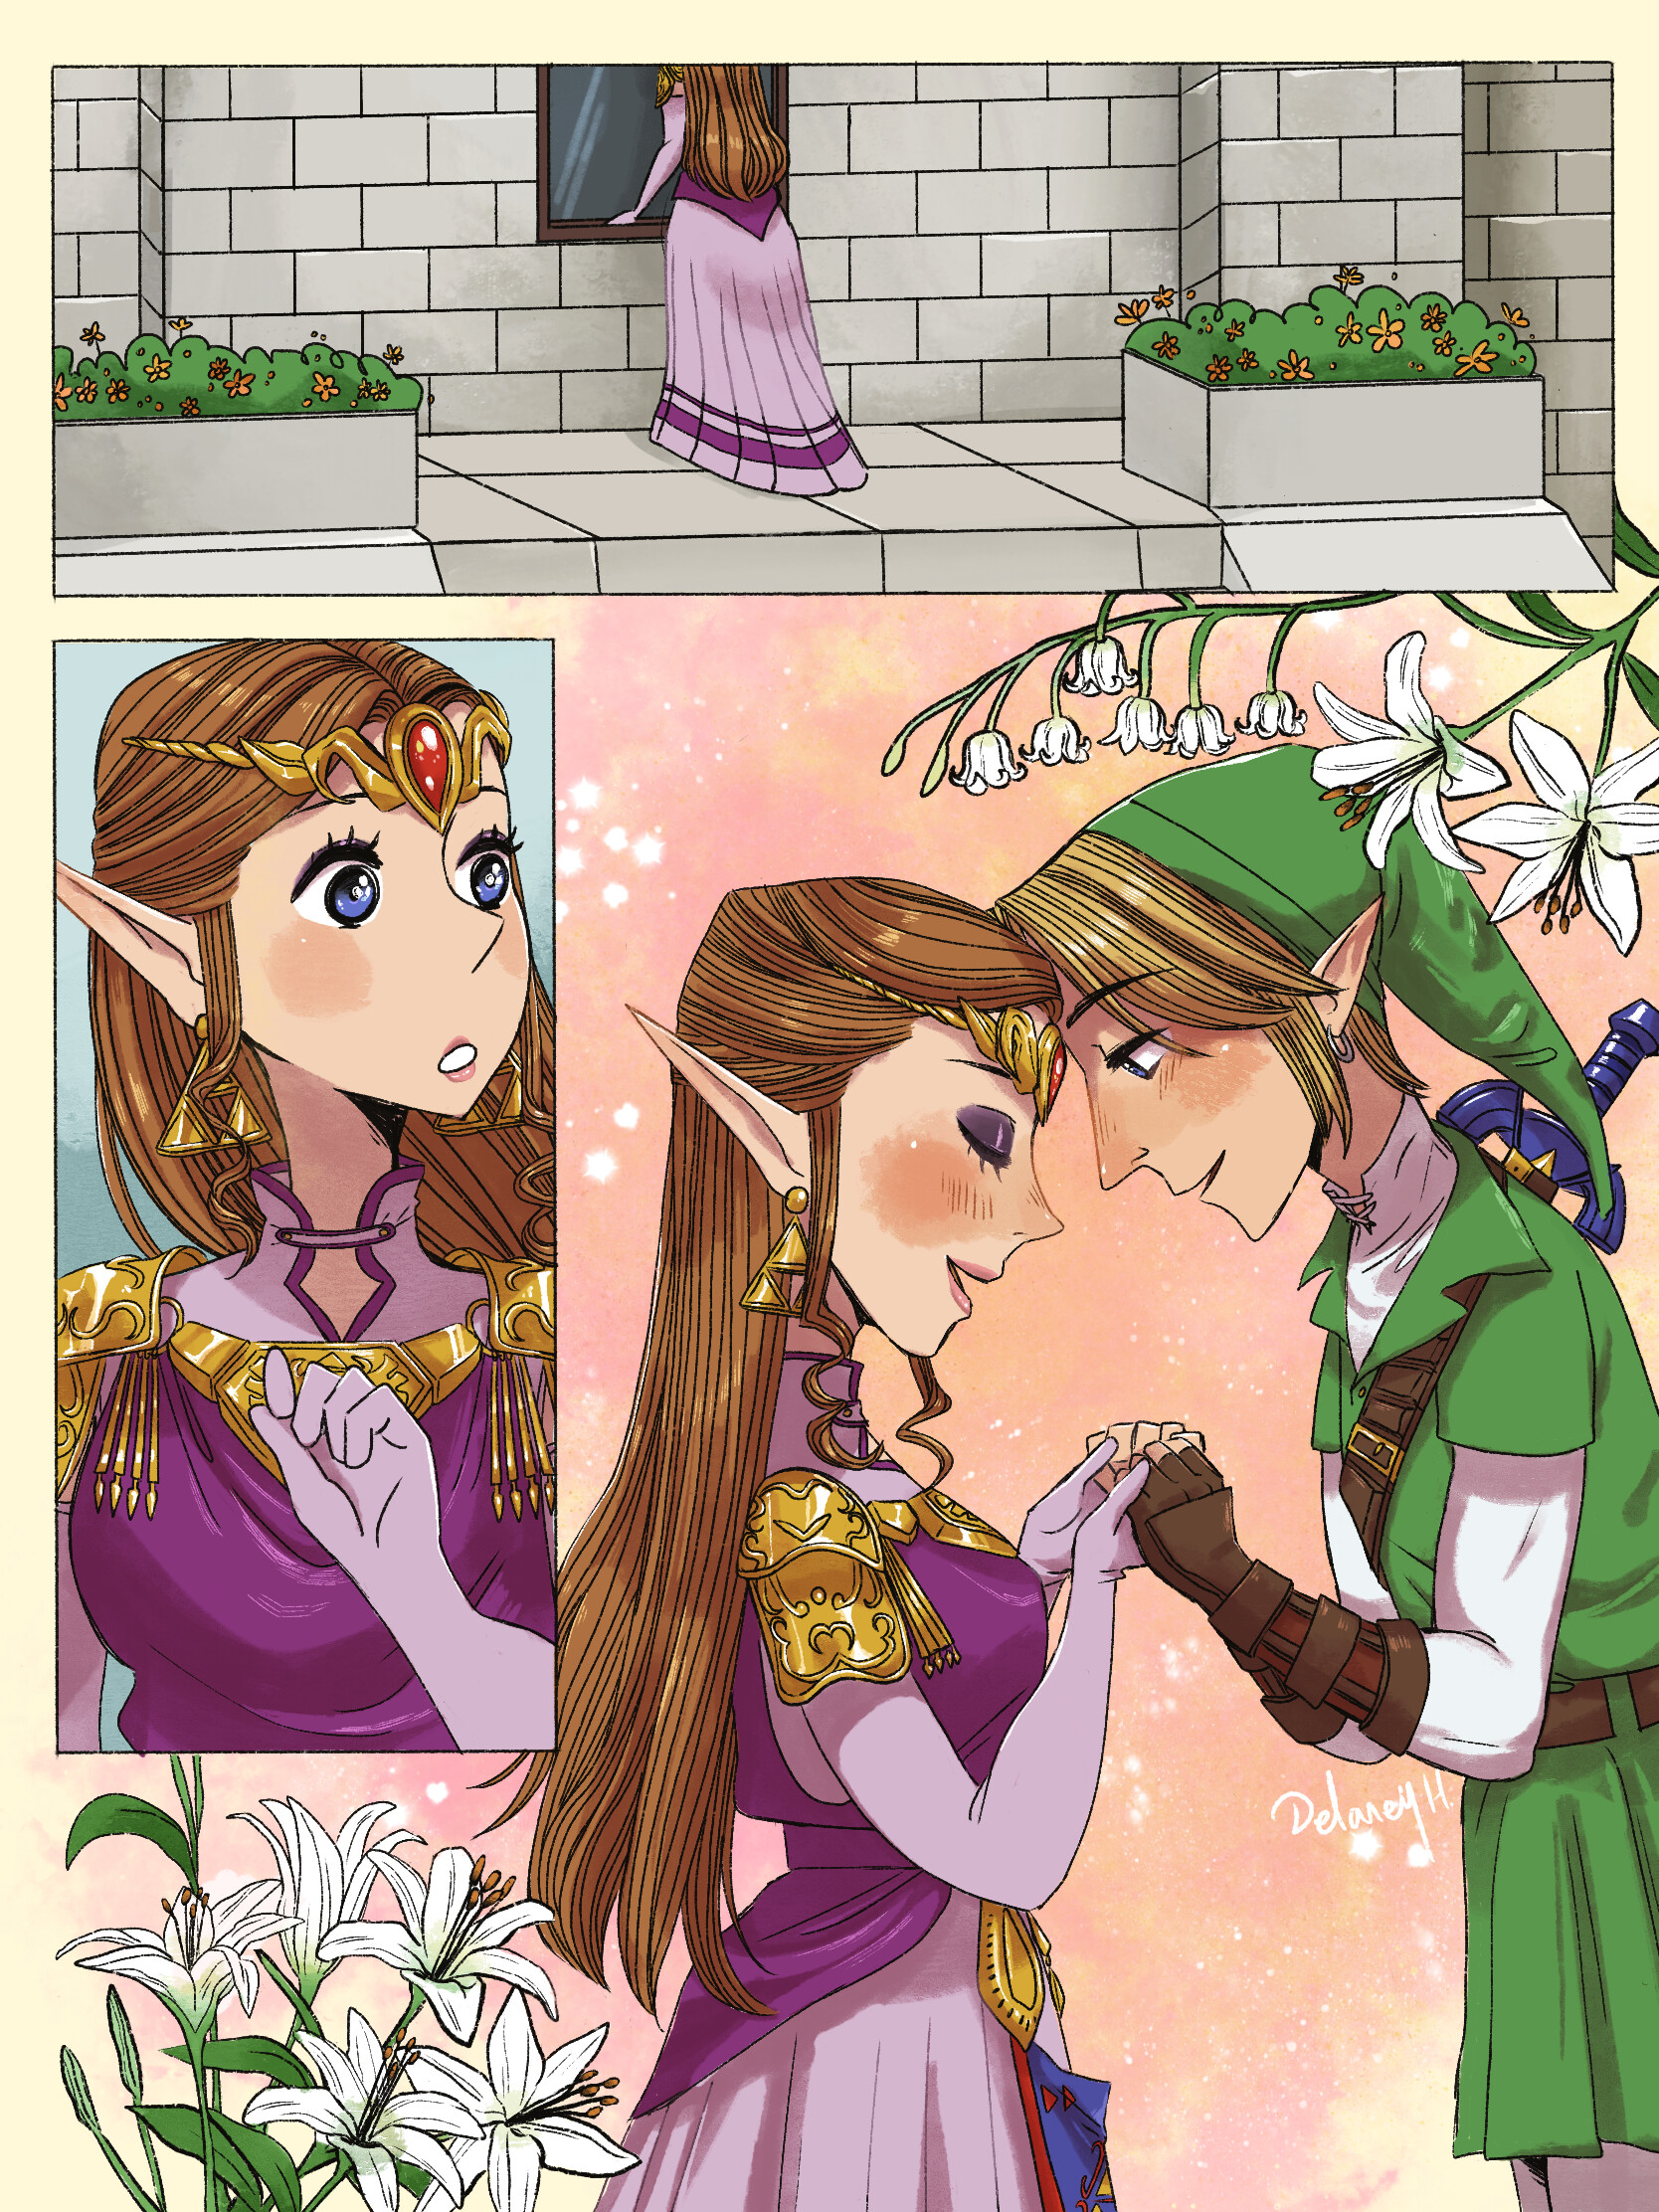 Comic pages based on the Legend of Zelda franchise with varing tones and st...